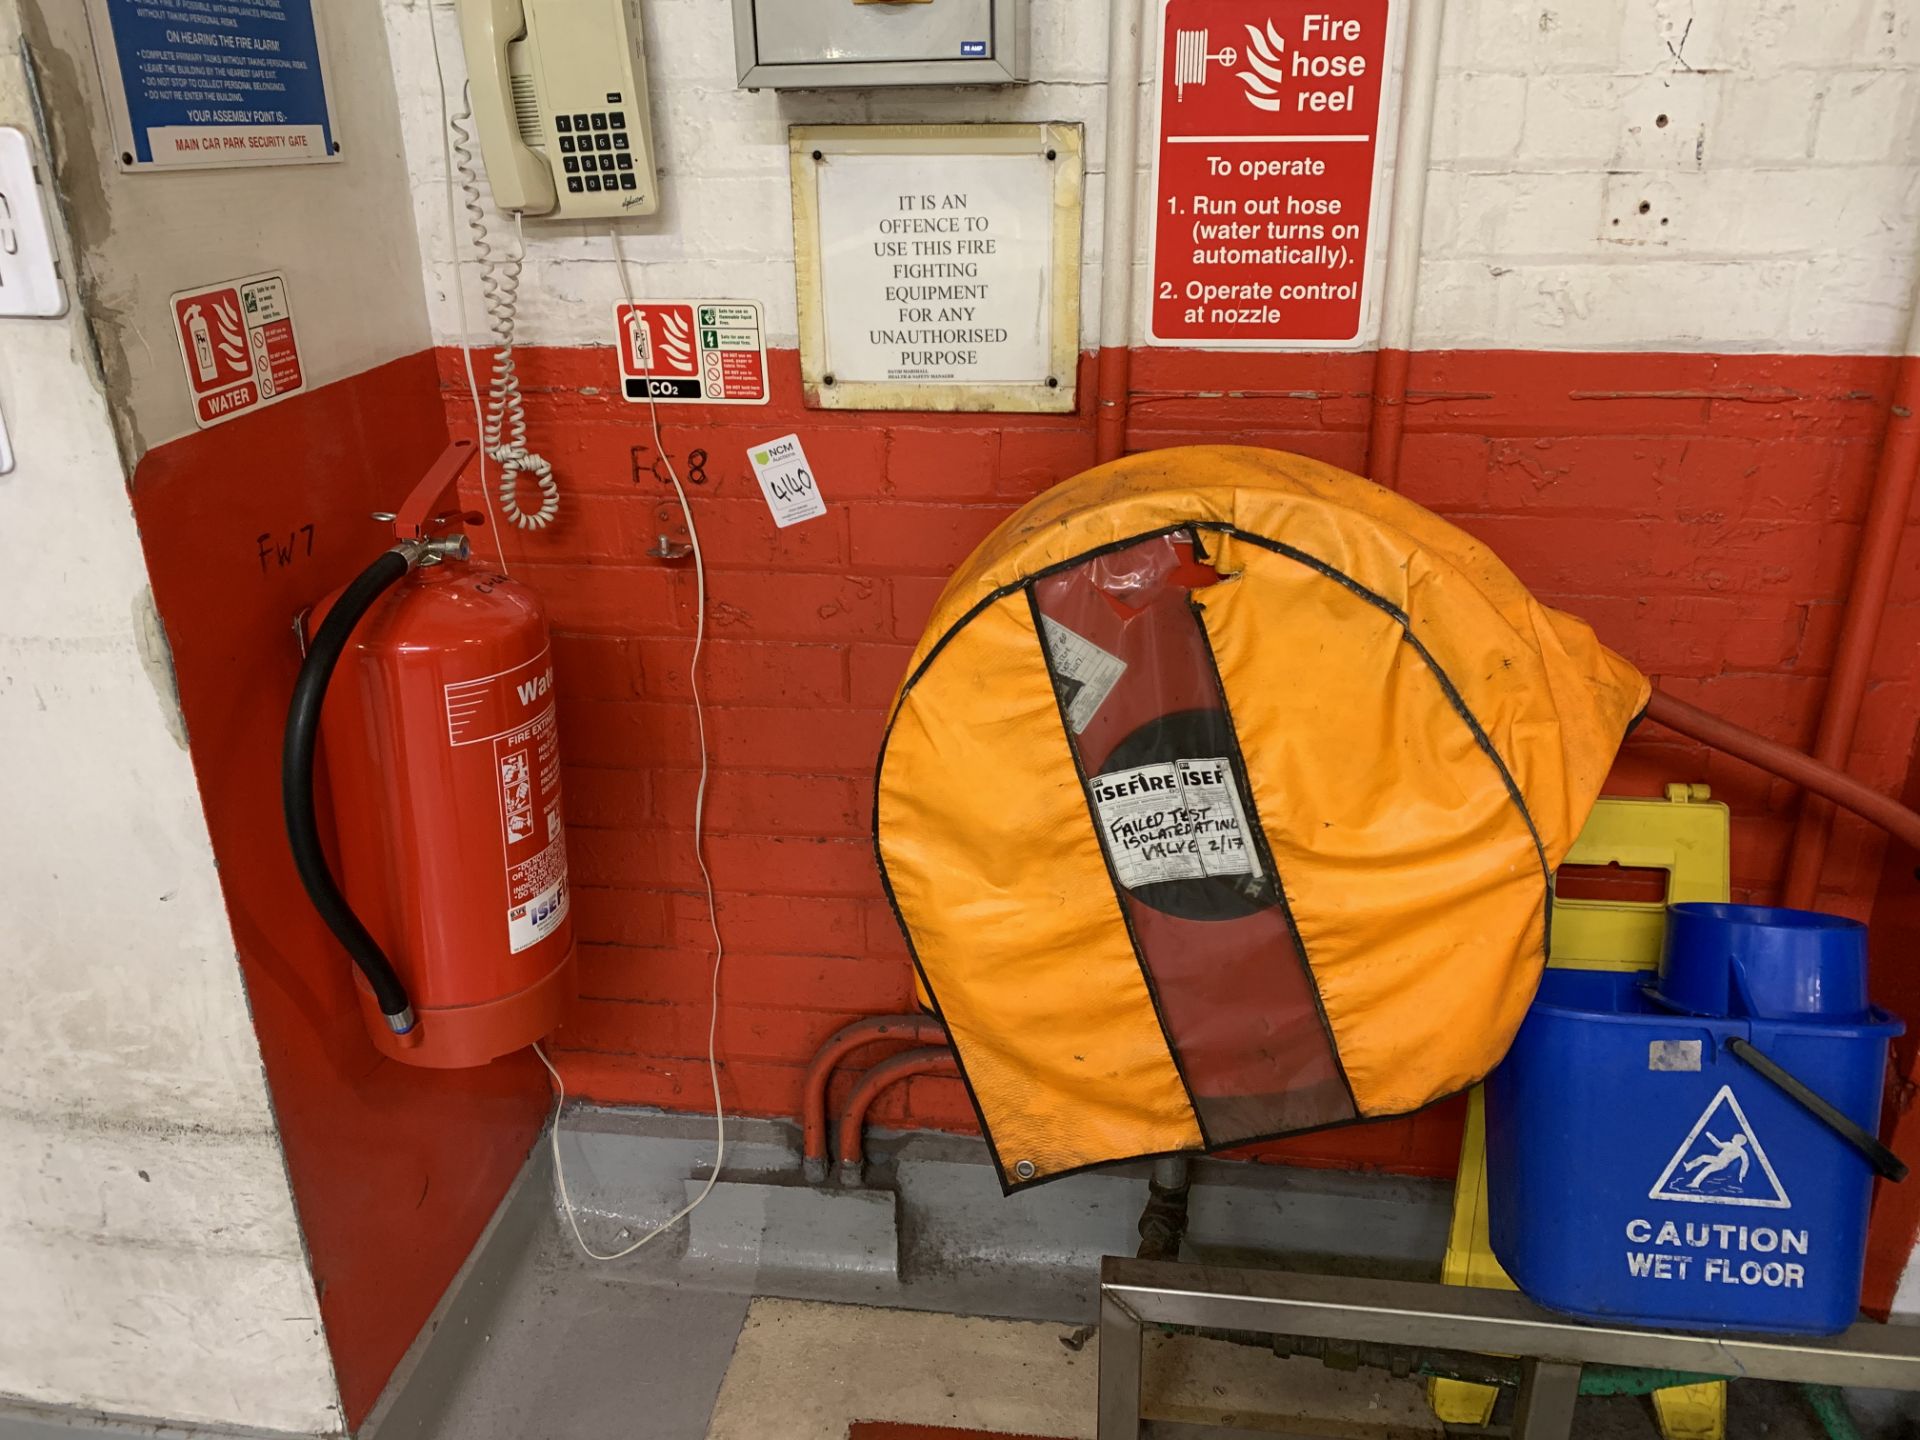 Fire Hose reel and fire extinguisher